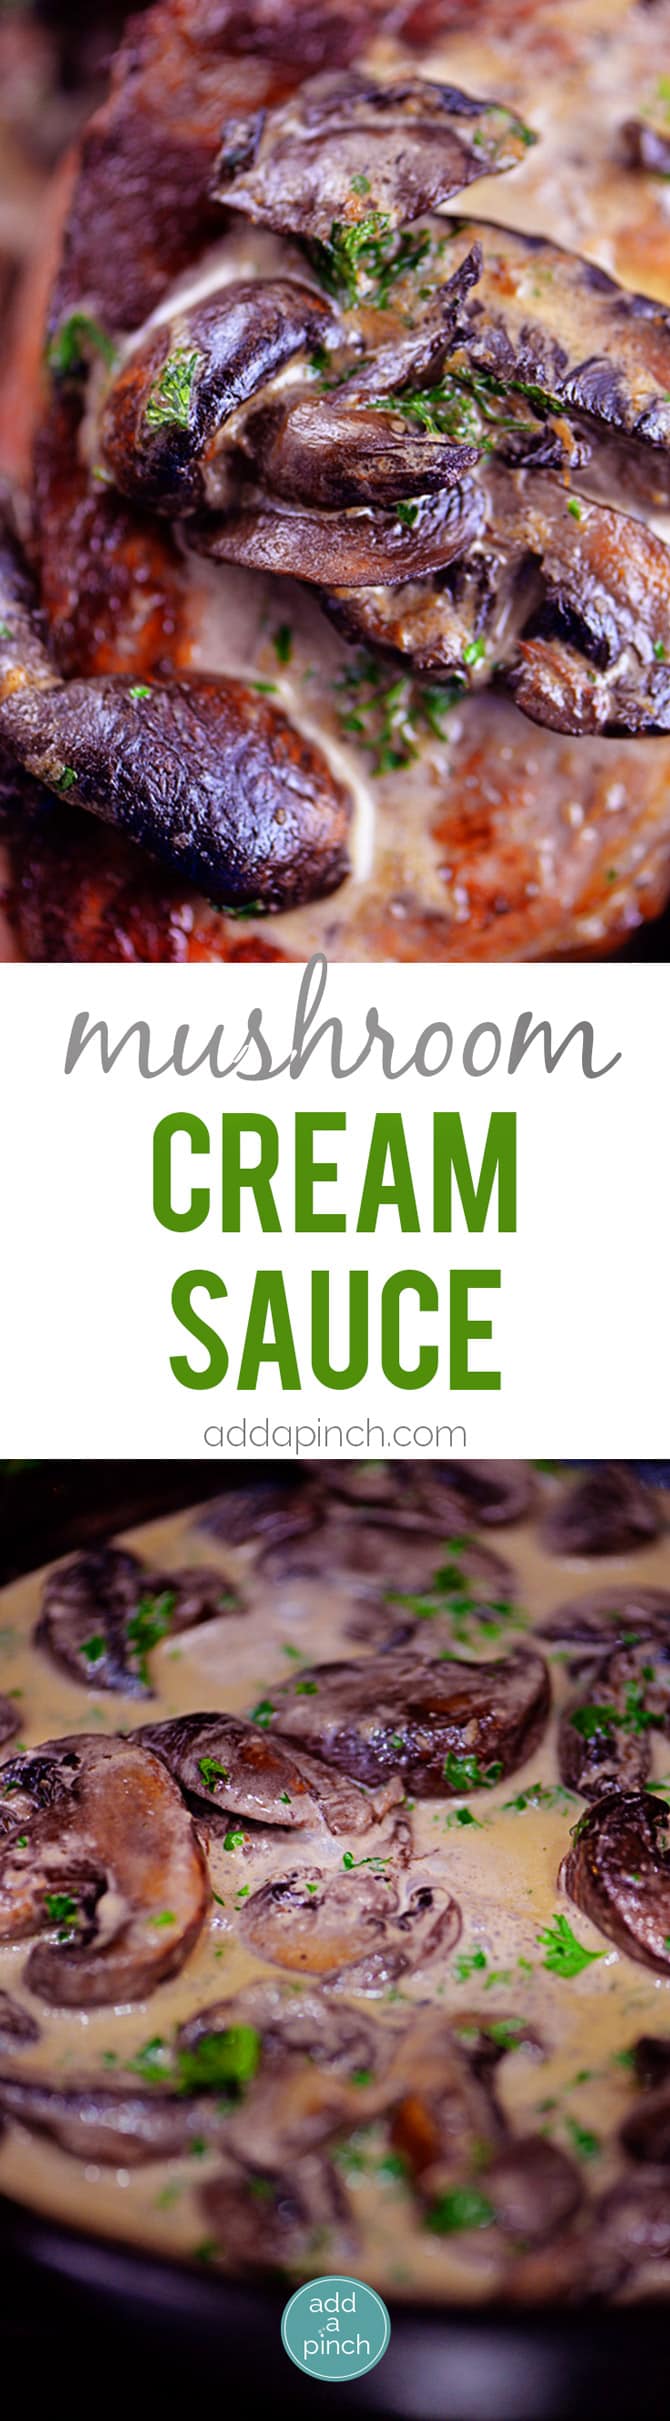 Mushroom Cream Sauce Recipe - Mushroom Cream Sauce makes a delicious addition to so many dishes. Serve this mushroom cream sauce over pasta, chicken, beef and so much more. // addapinch.com